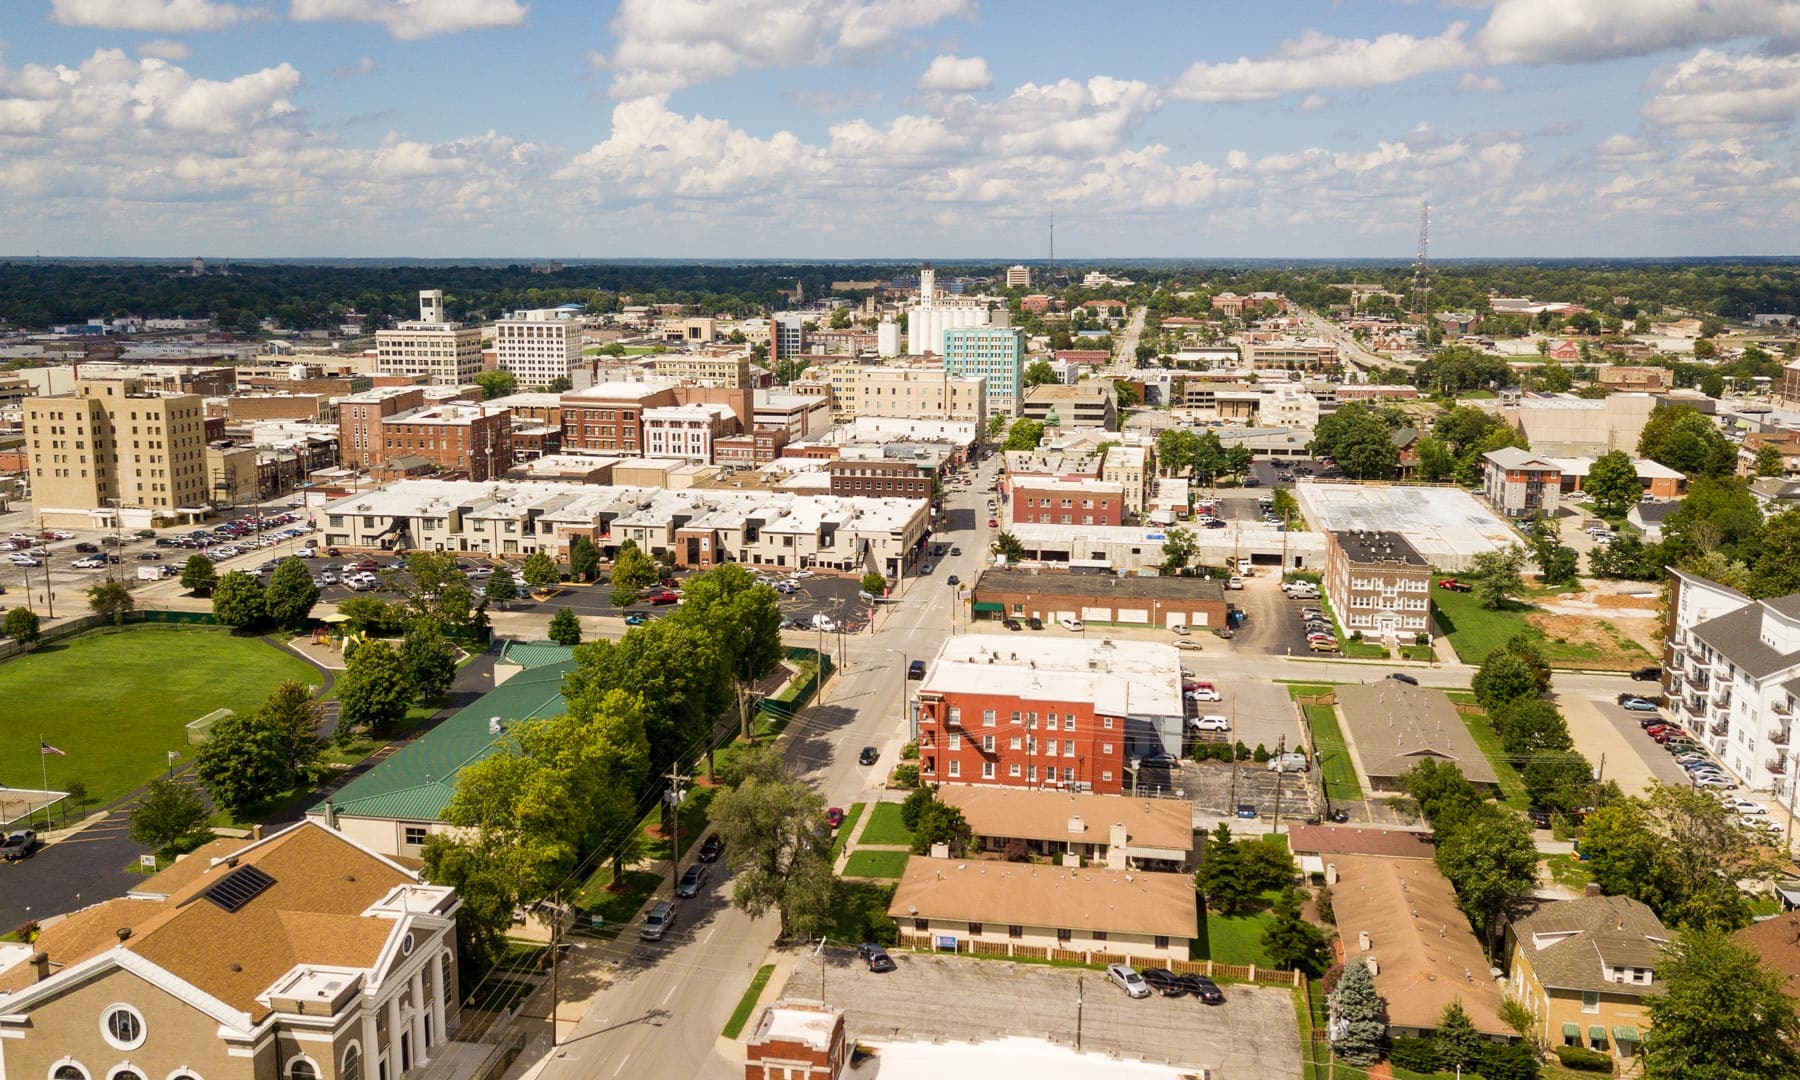 The 15 Best Things To Do In Springfield